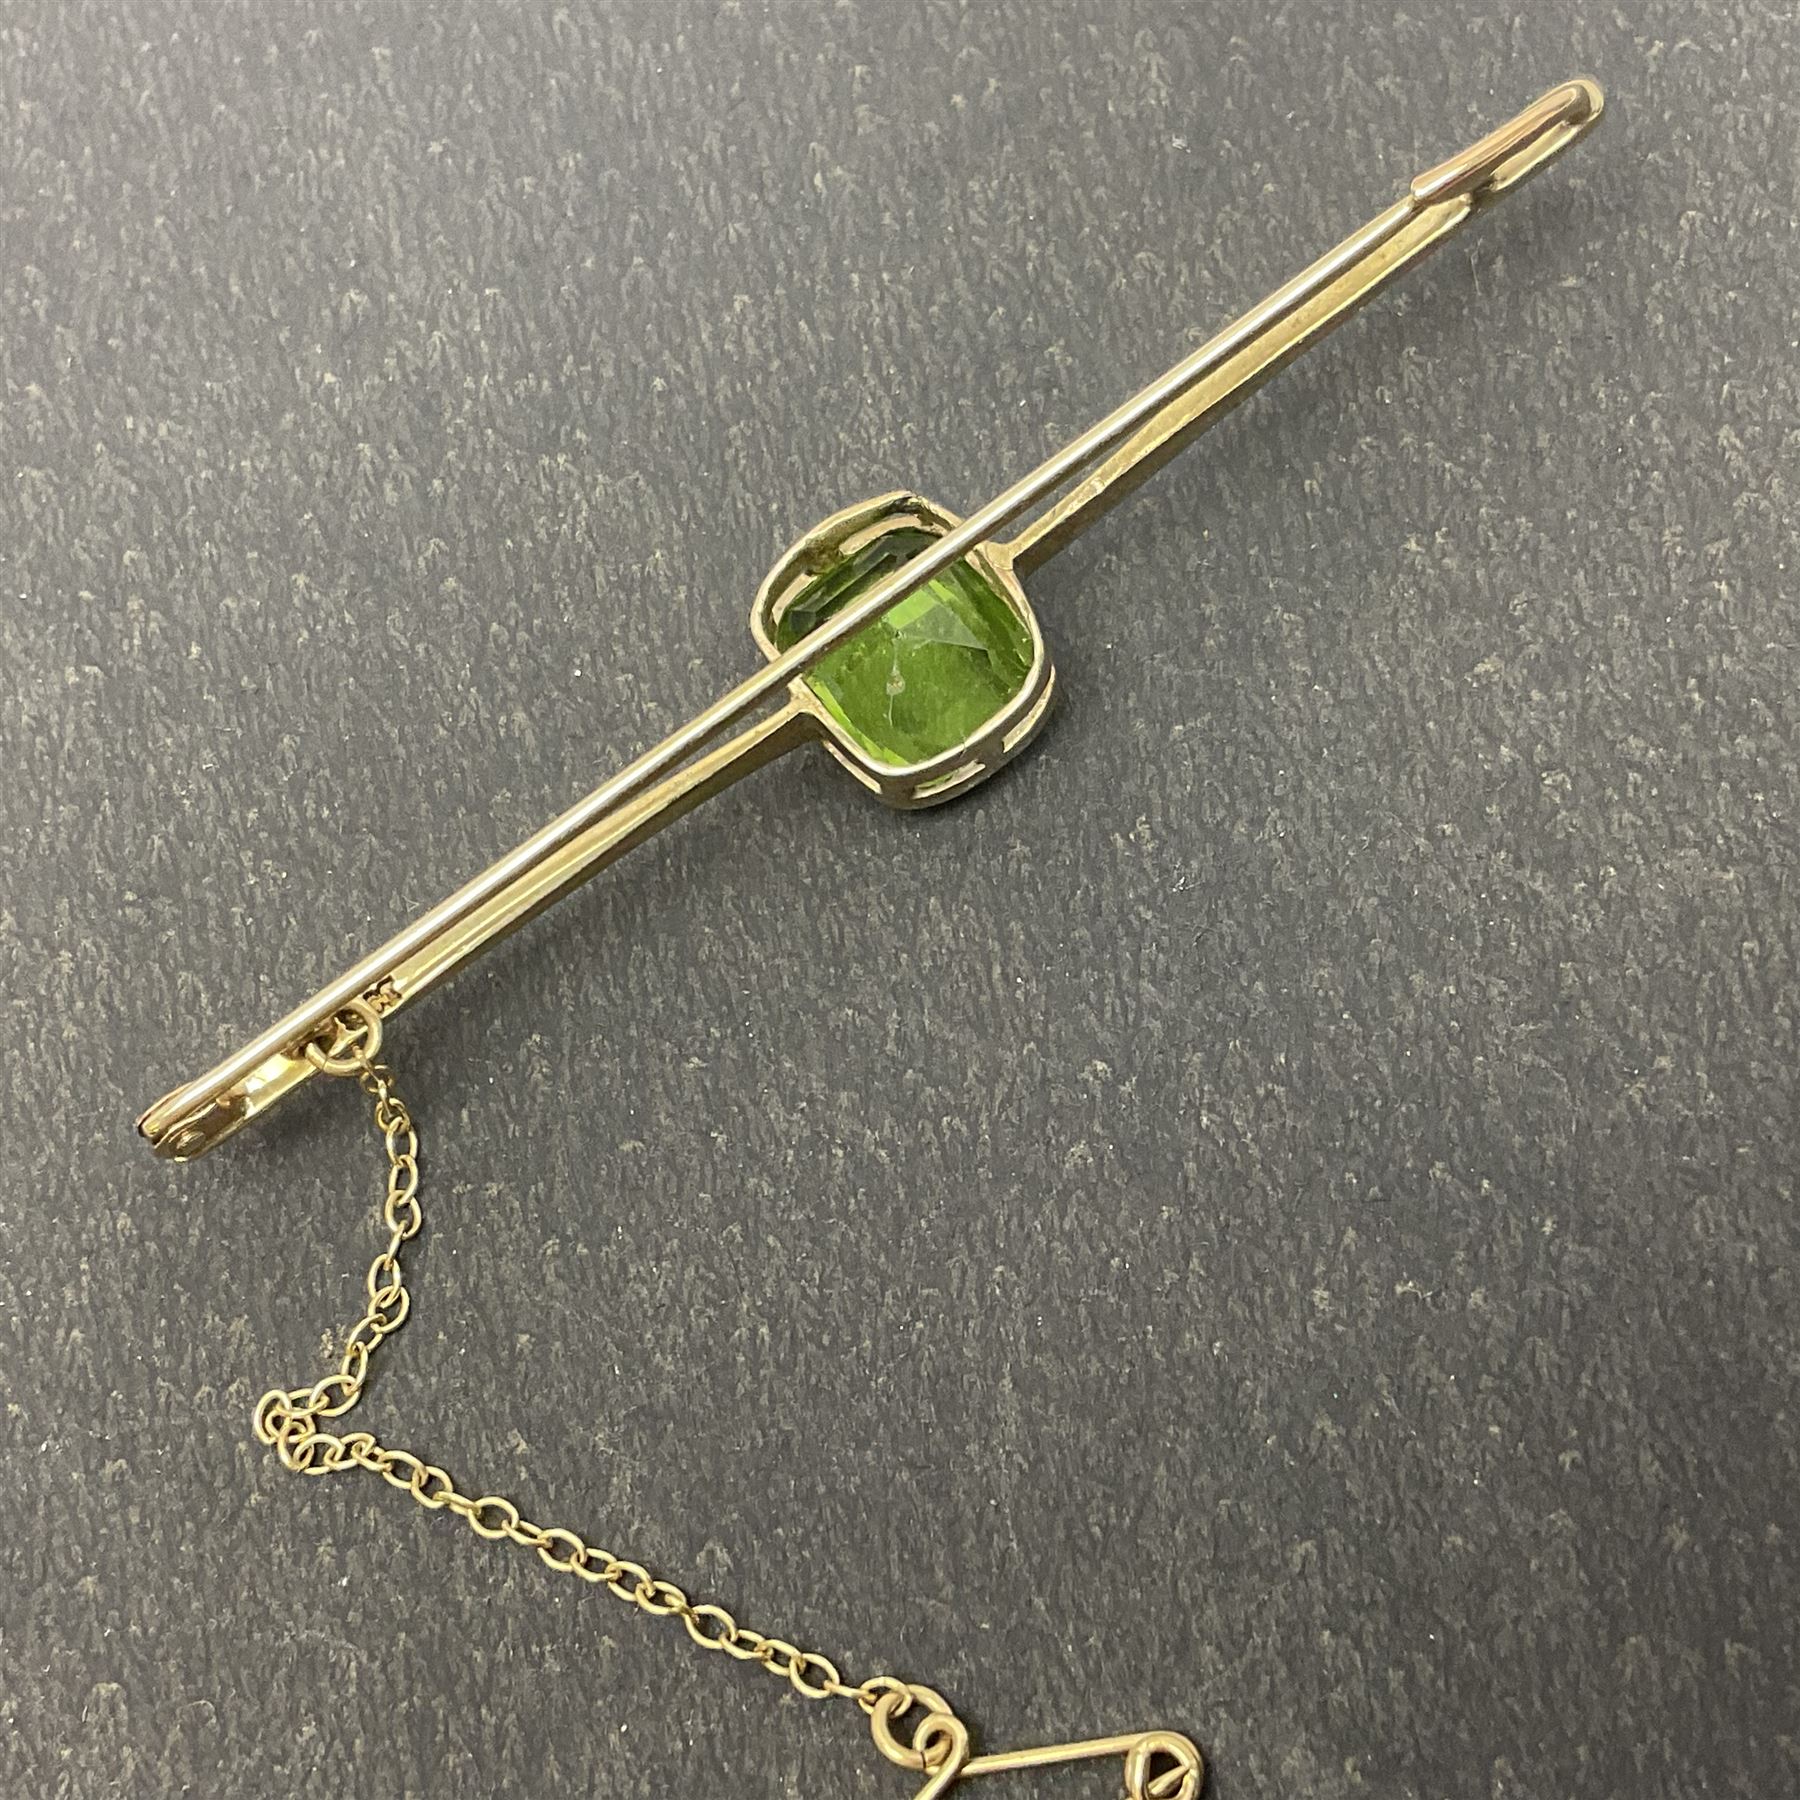 9ct gold bar brooch set with green stone - Image 8 of 9